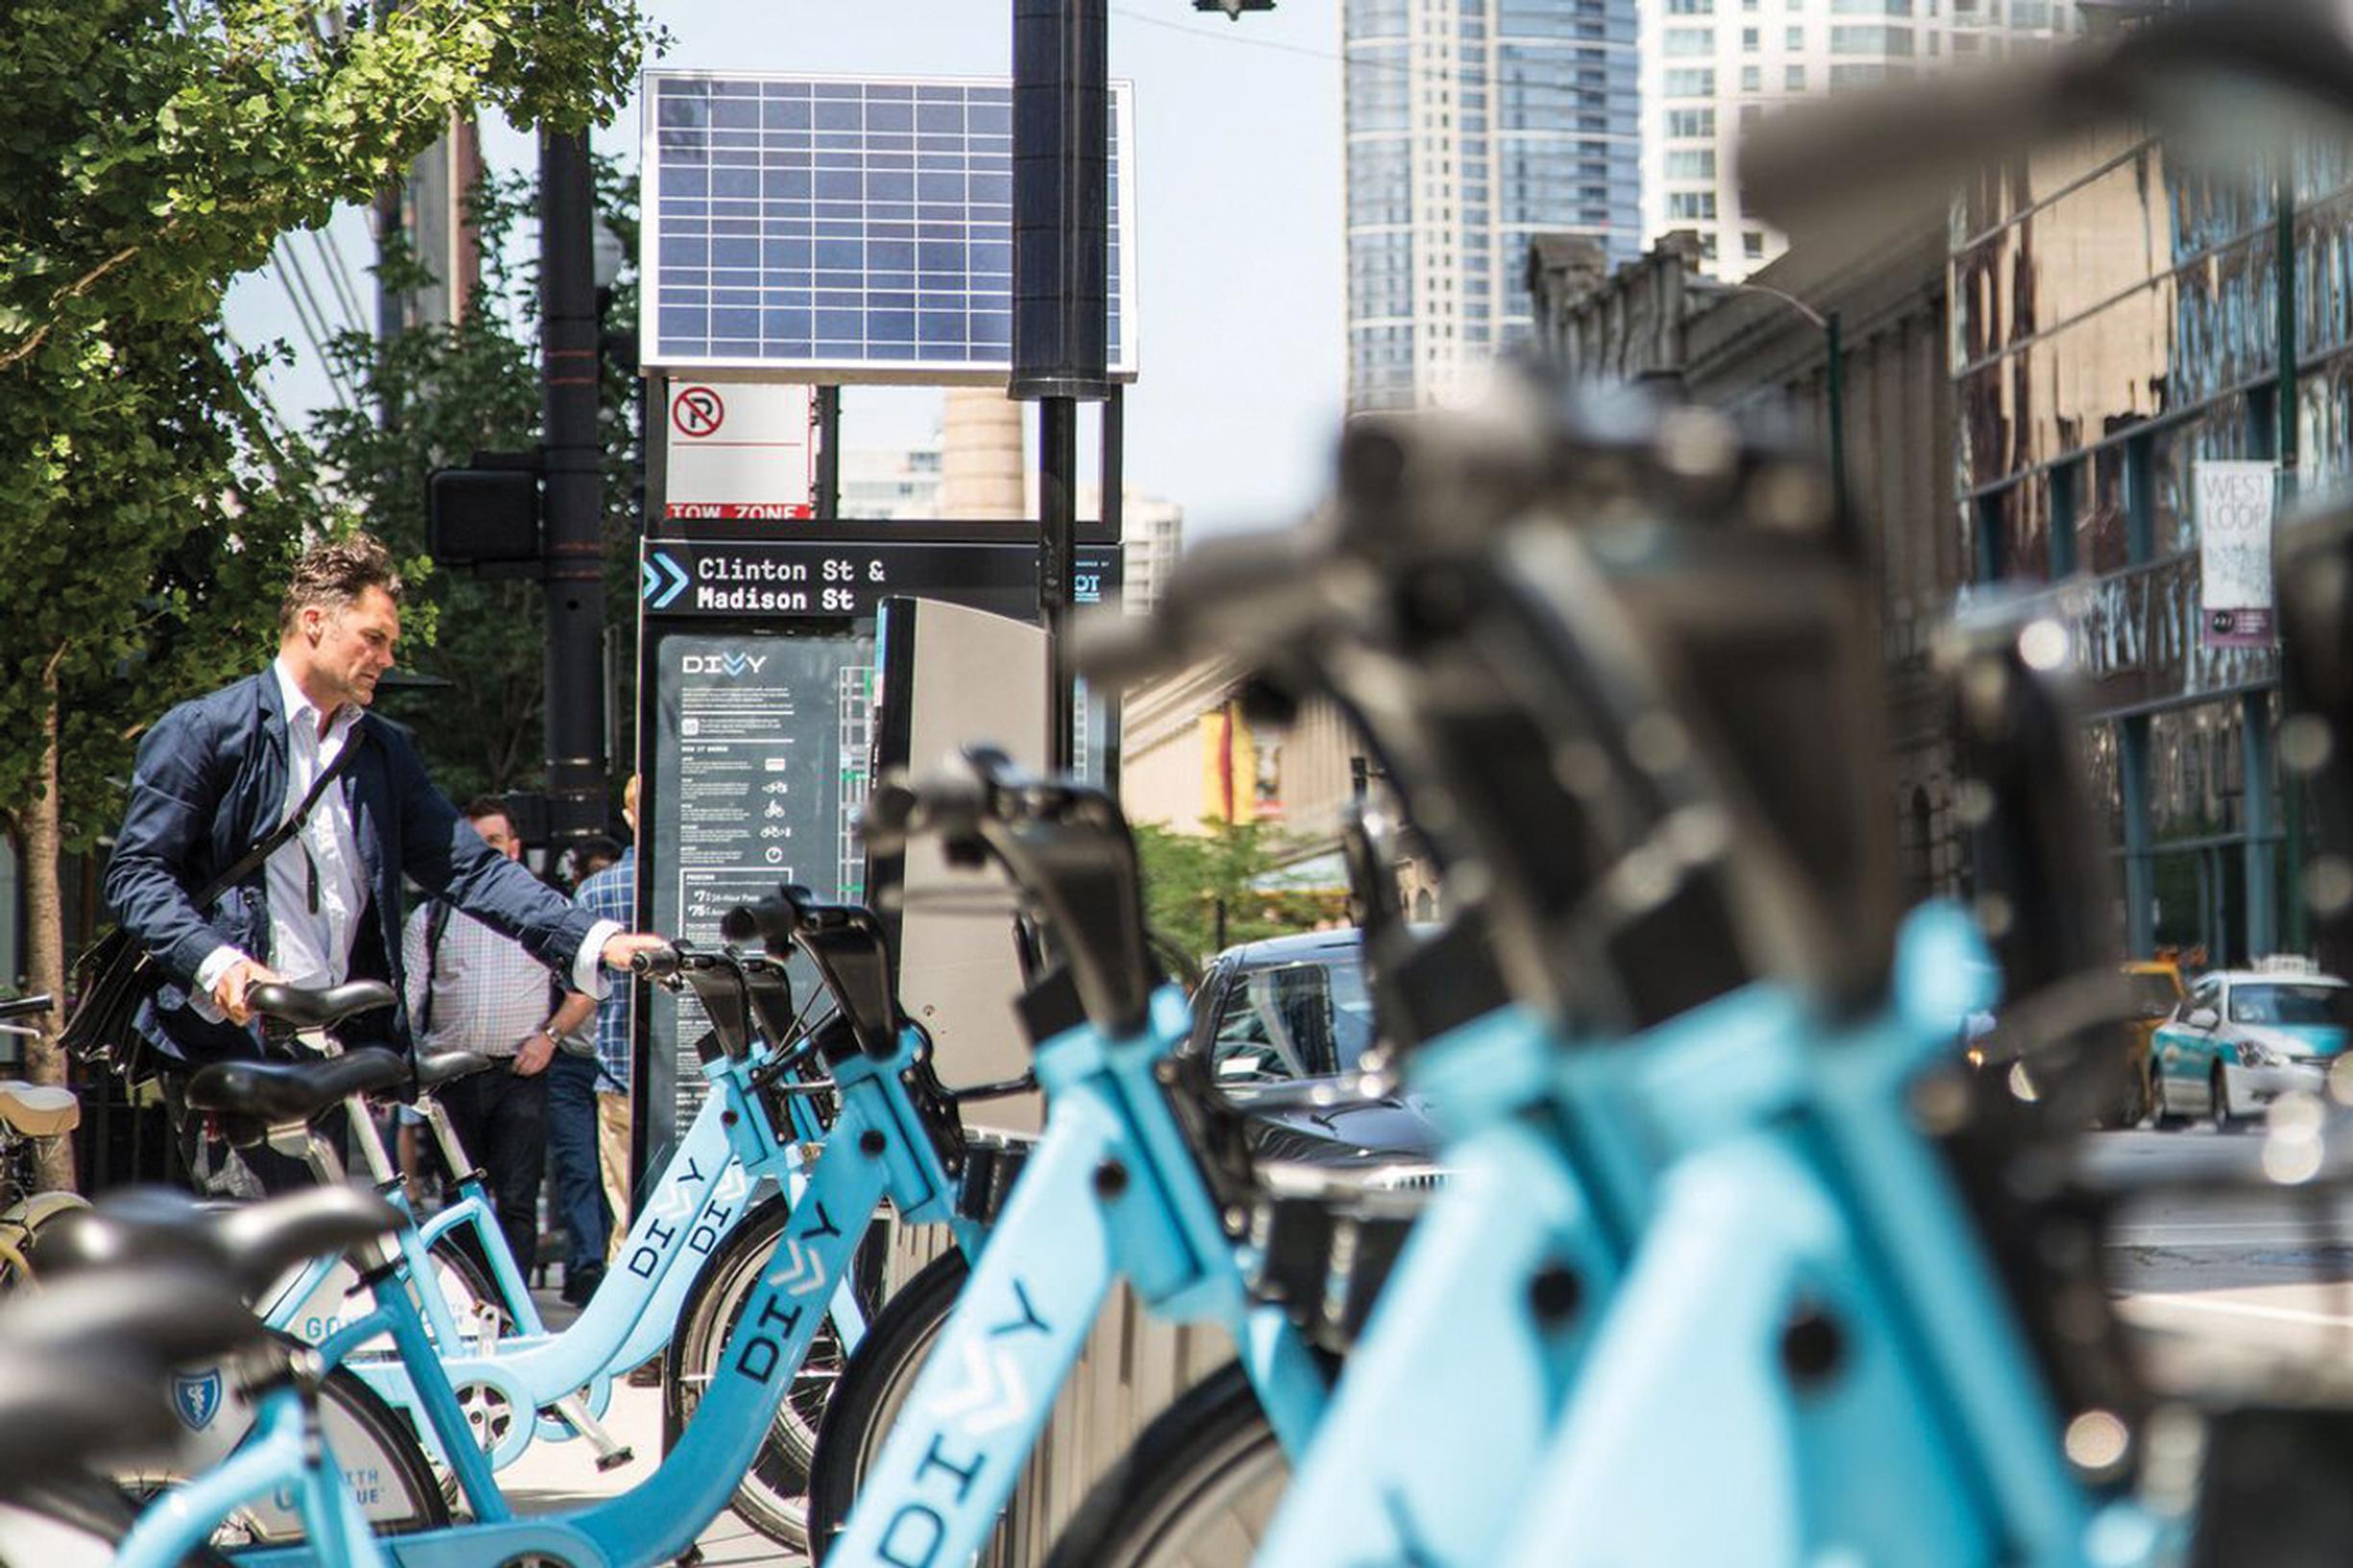 Copyright © Tony Webster, Creative Commons
Divvy is owned by the Chicago Department of Transportation (CDOT), with funding coming partly from the city’s Tax Increment Financing program